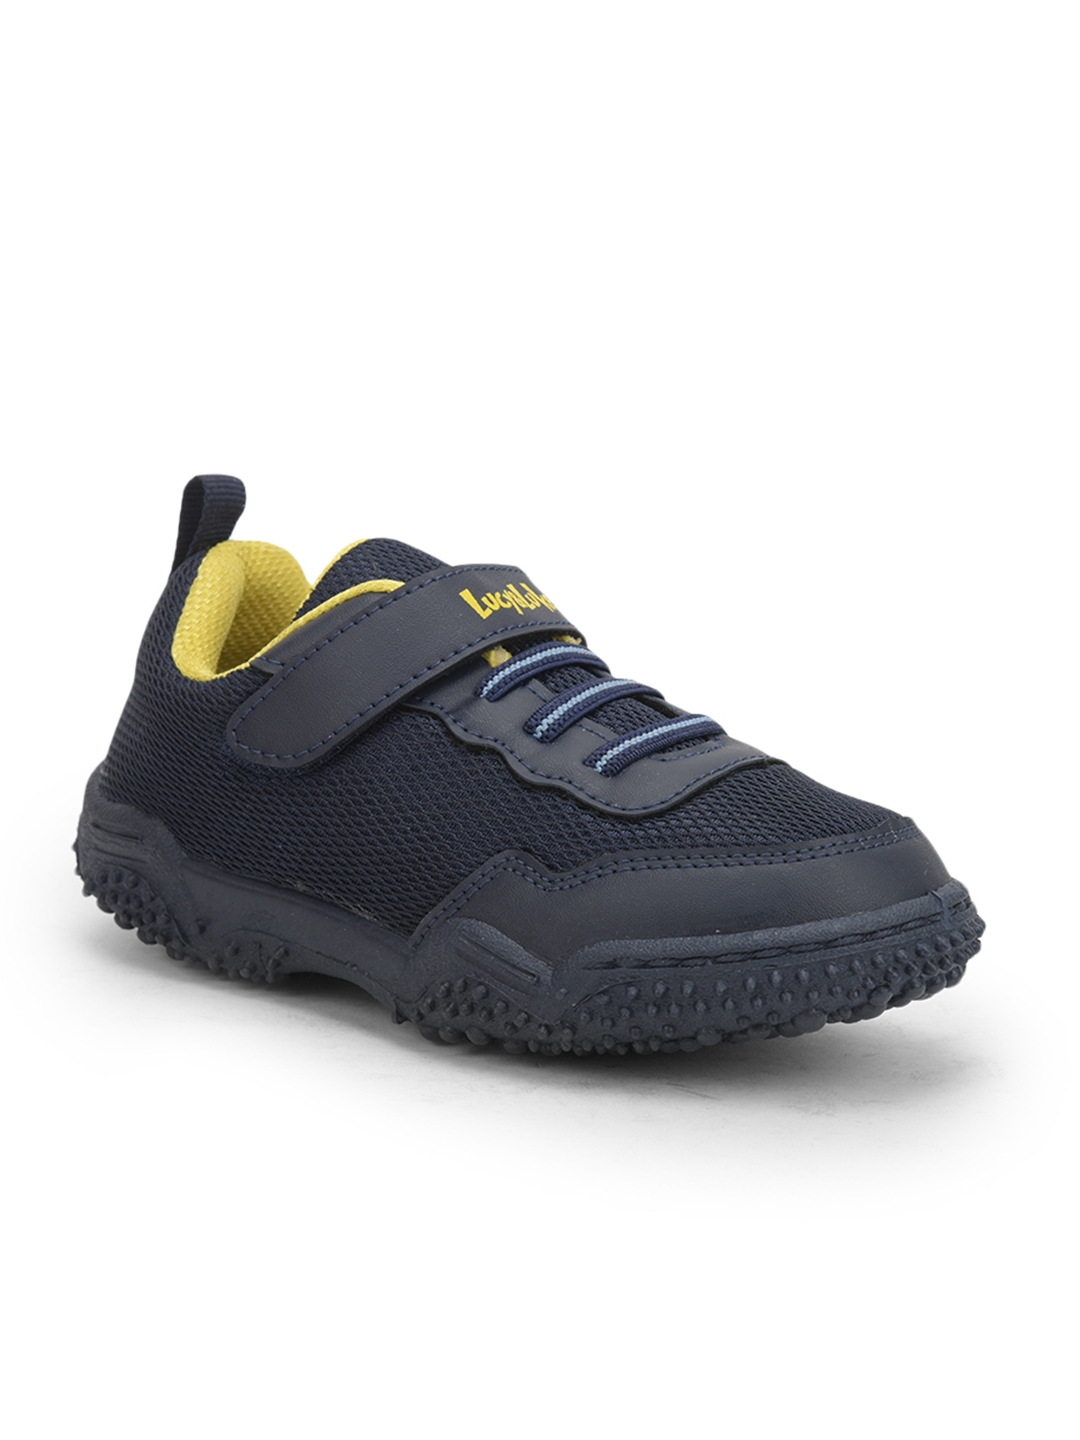 Liberty | Lucy & Luke by Liberty Blue Sports Shoes QUICK-1 MRP 1499 For :- Unisex